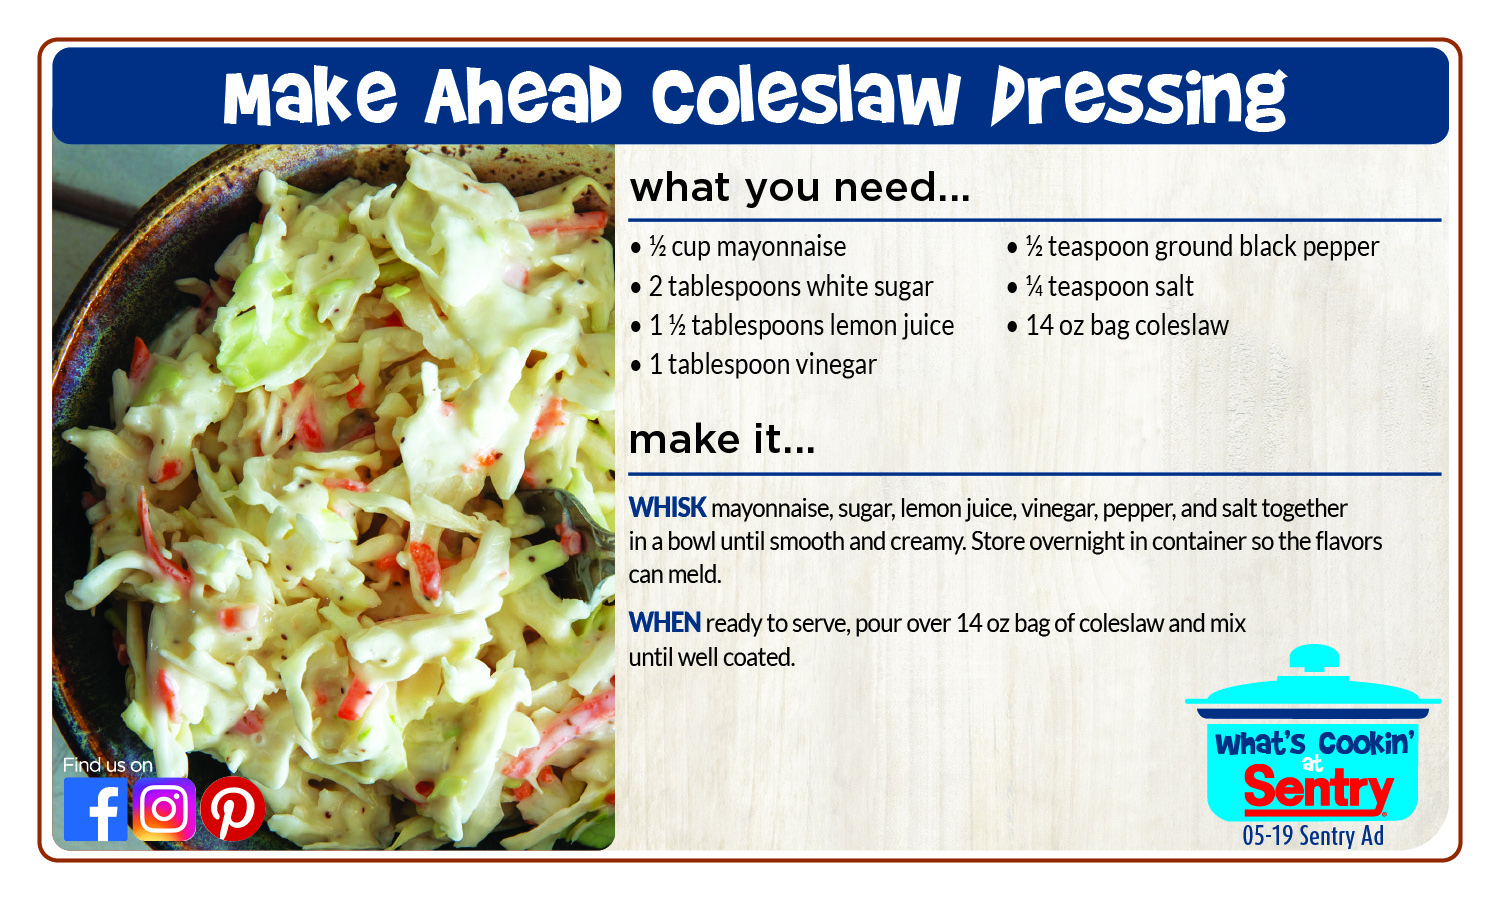 Recipe Card for Coleslaw Dressing